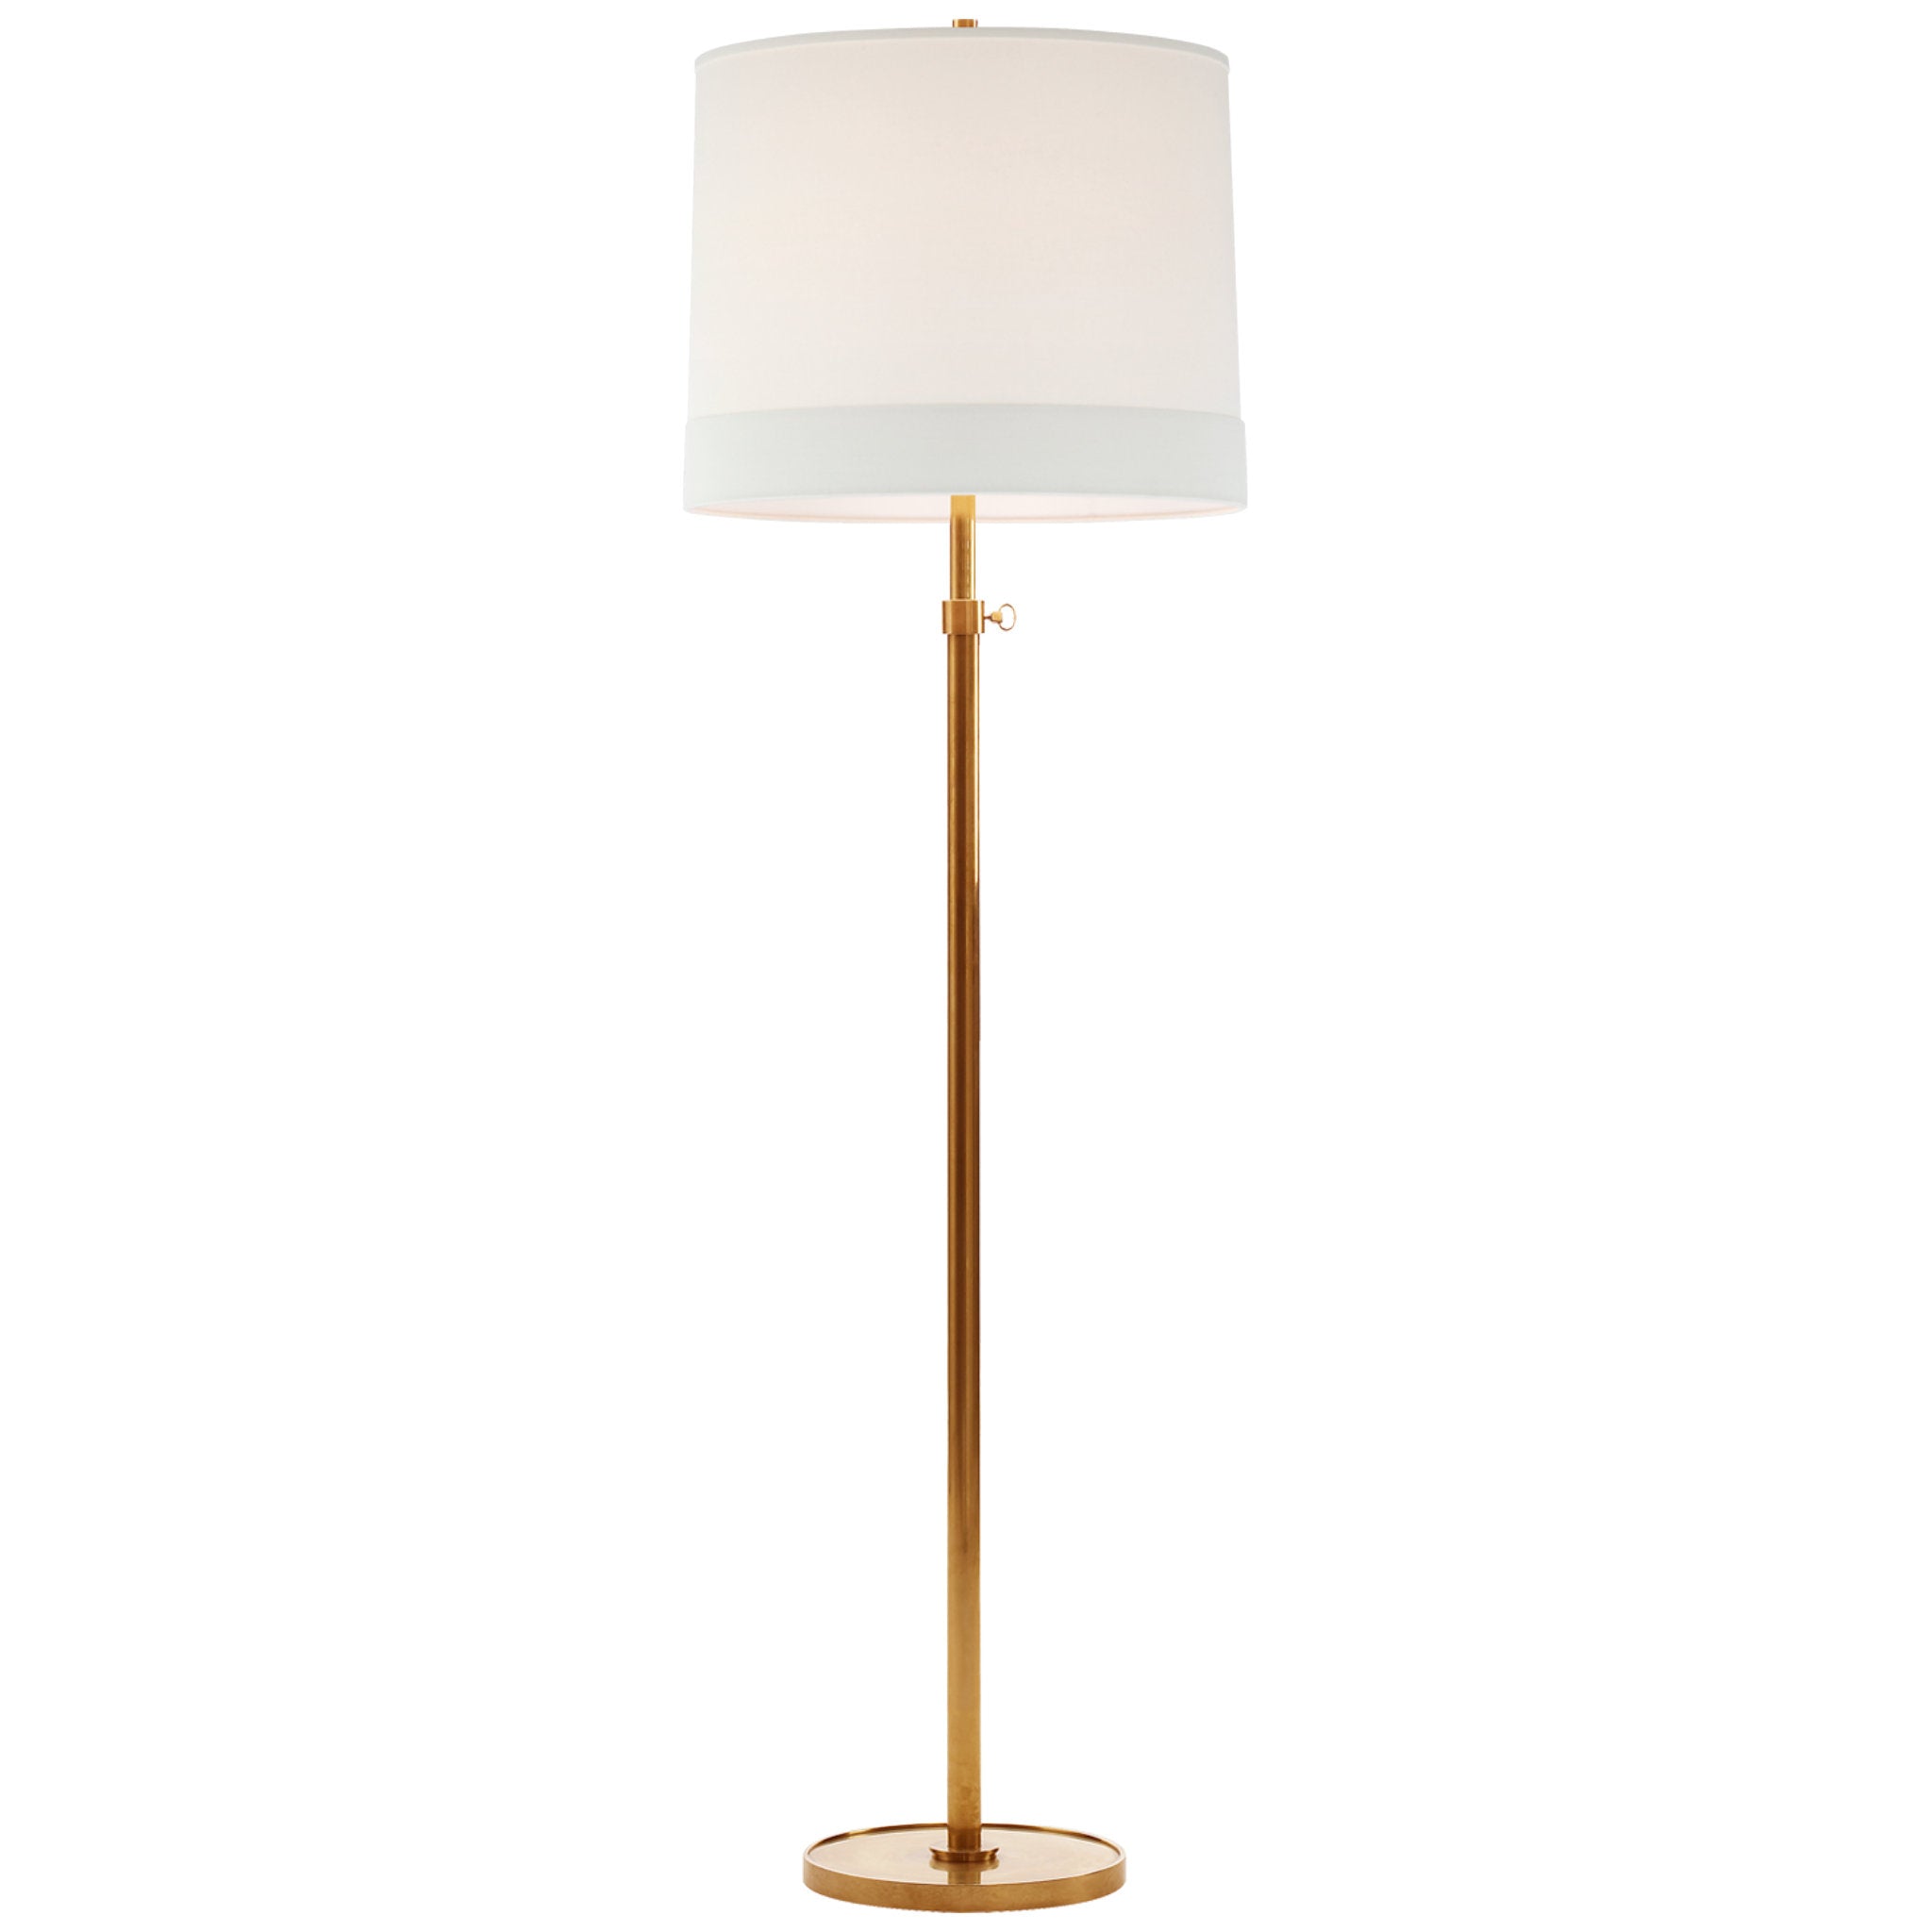 Barbara Barry Simple Floor Lamp in Soft Brass with Linen Shade